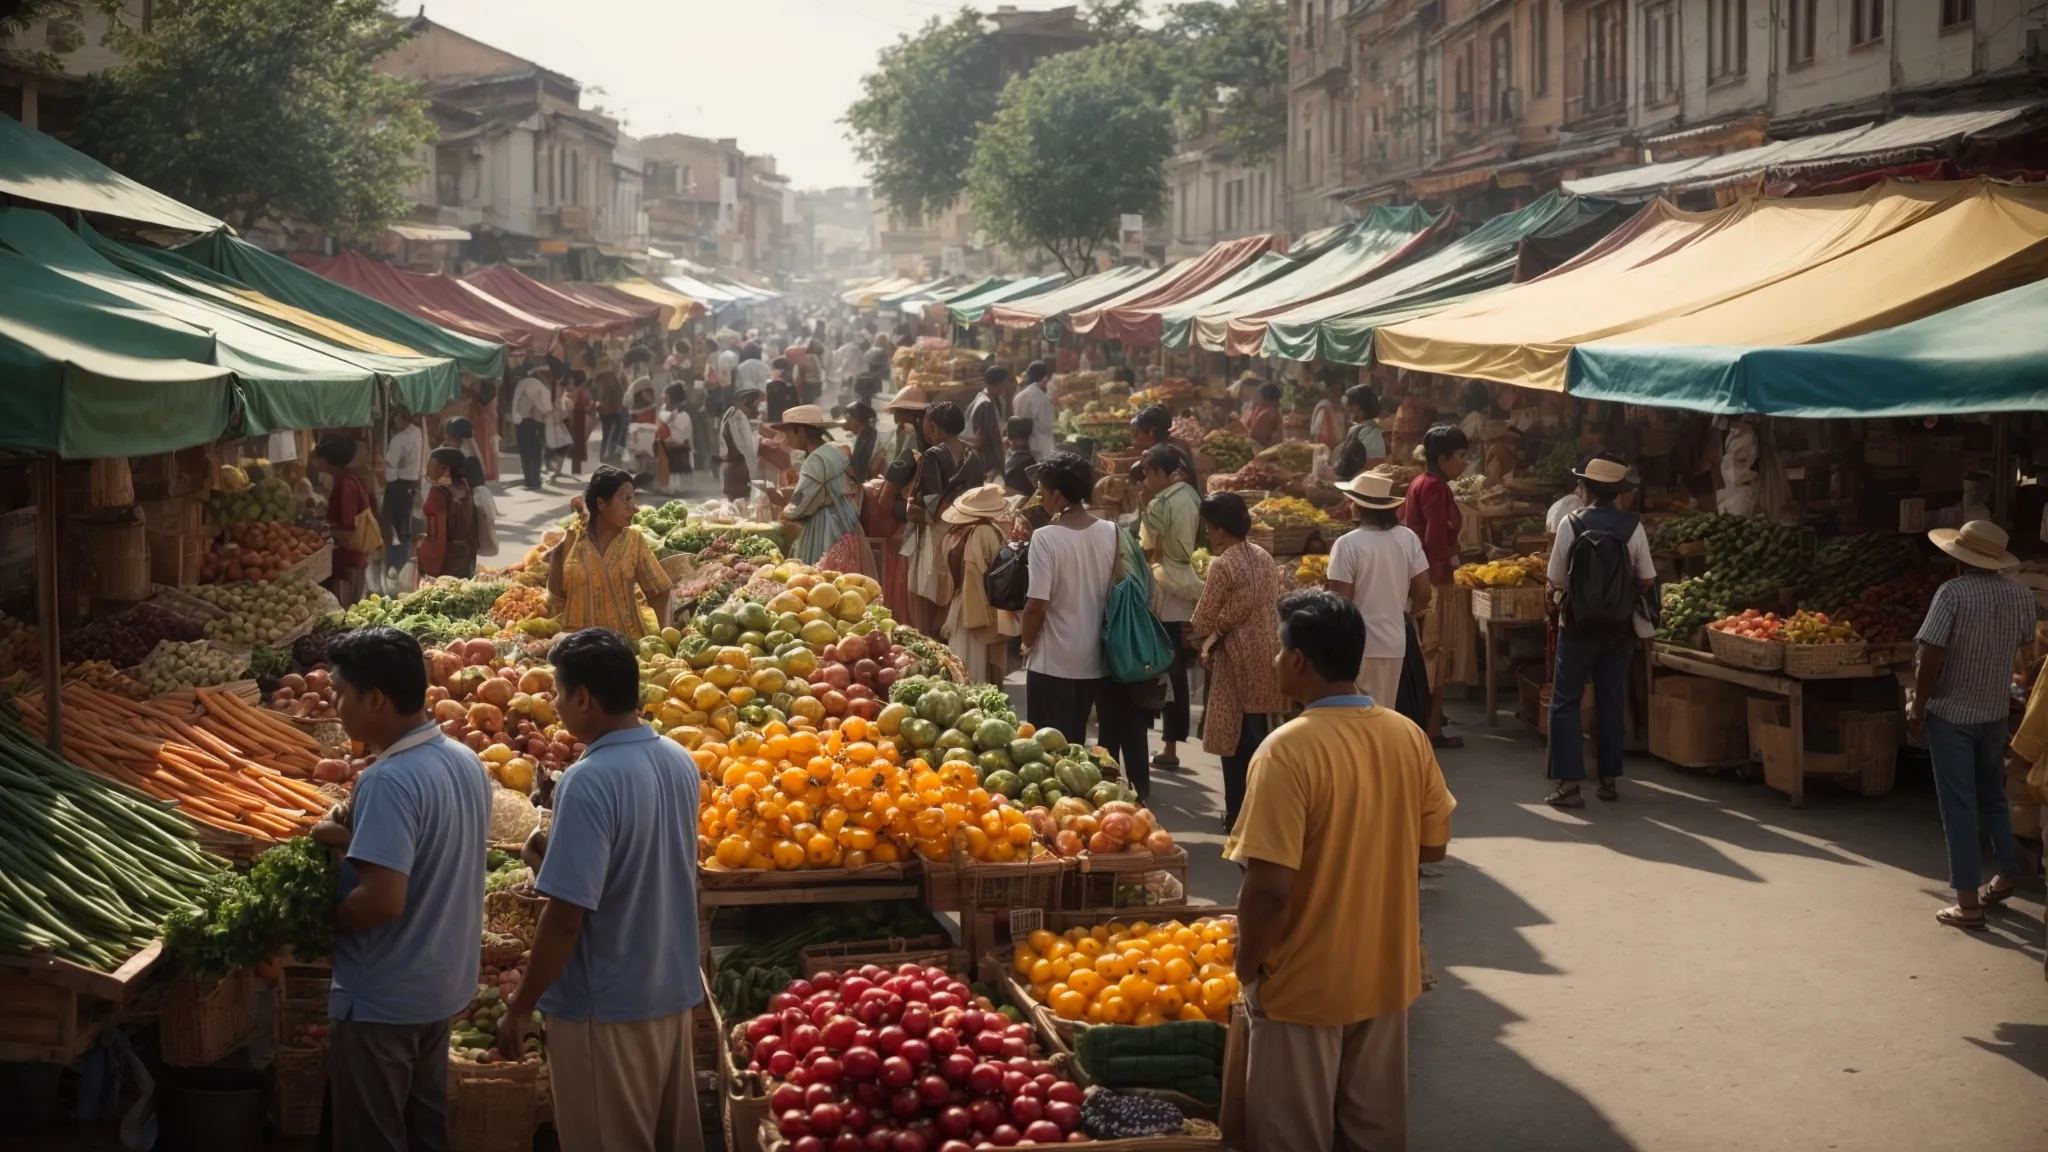 a vibrant open-air market scene bustling with local shoppers casually interacting with friendly vendors displaying an array of fresh, colorful produce.